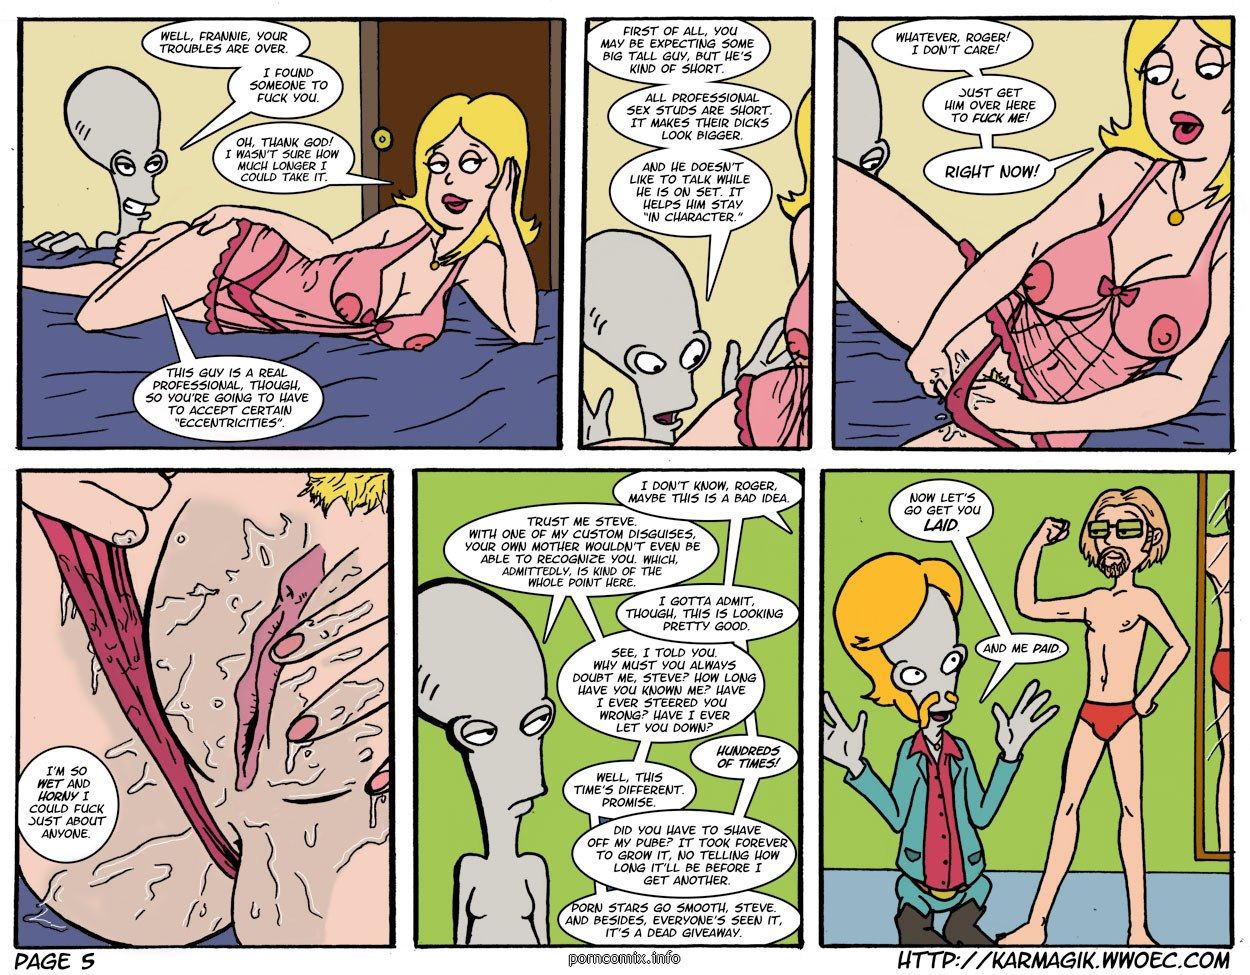 The American Wet Dream (American Dad) page 5